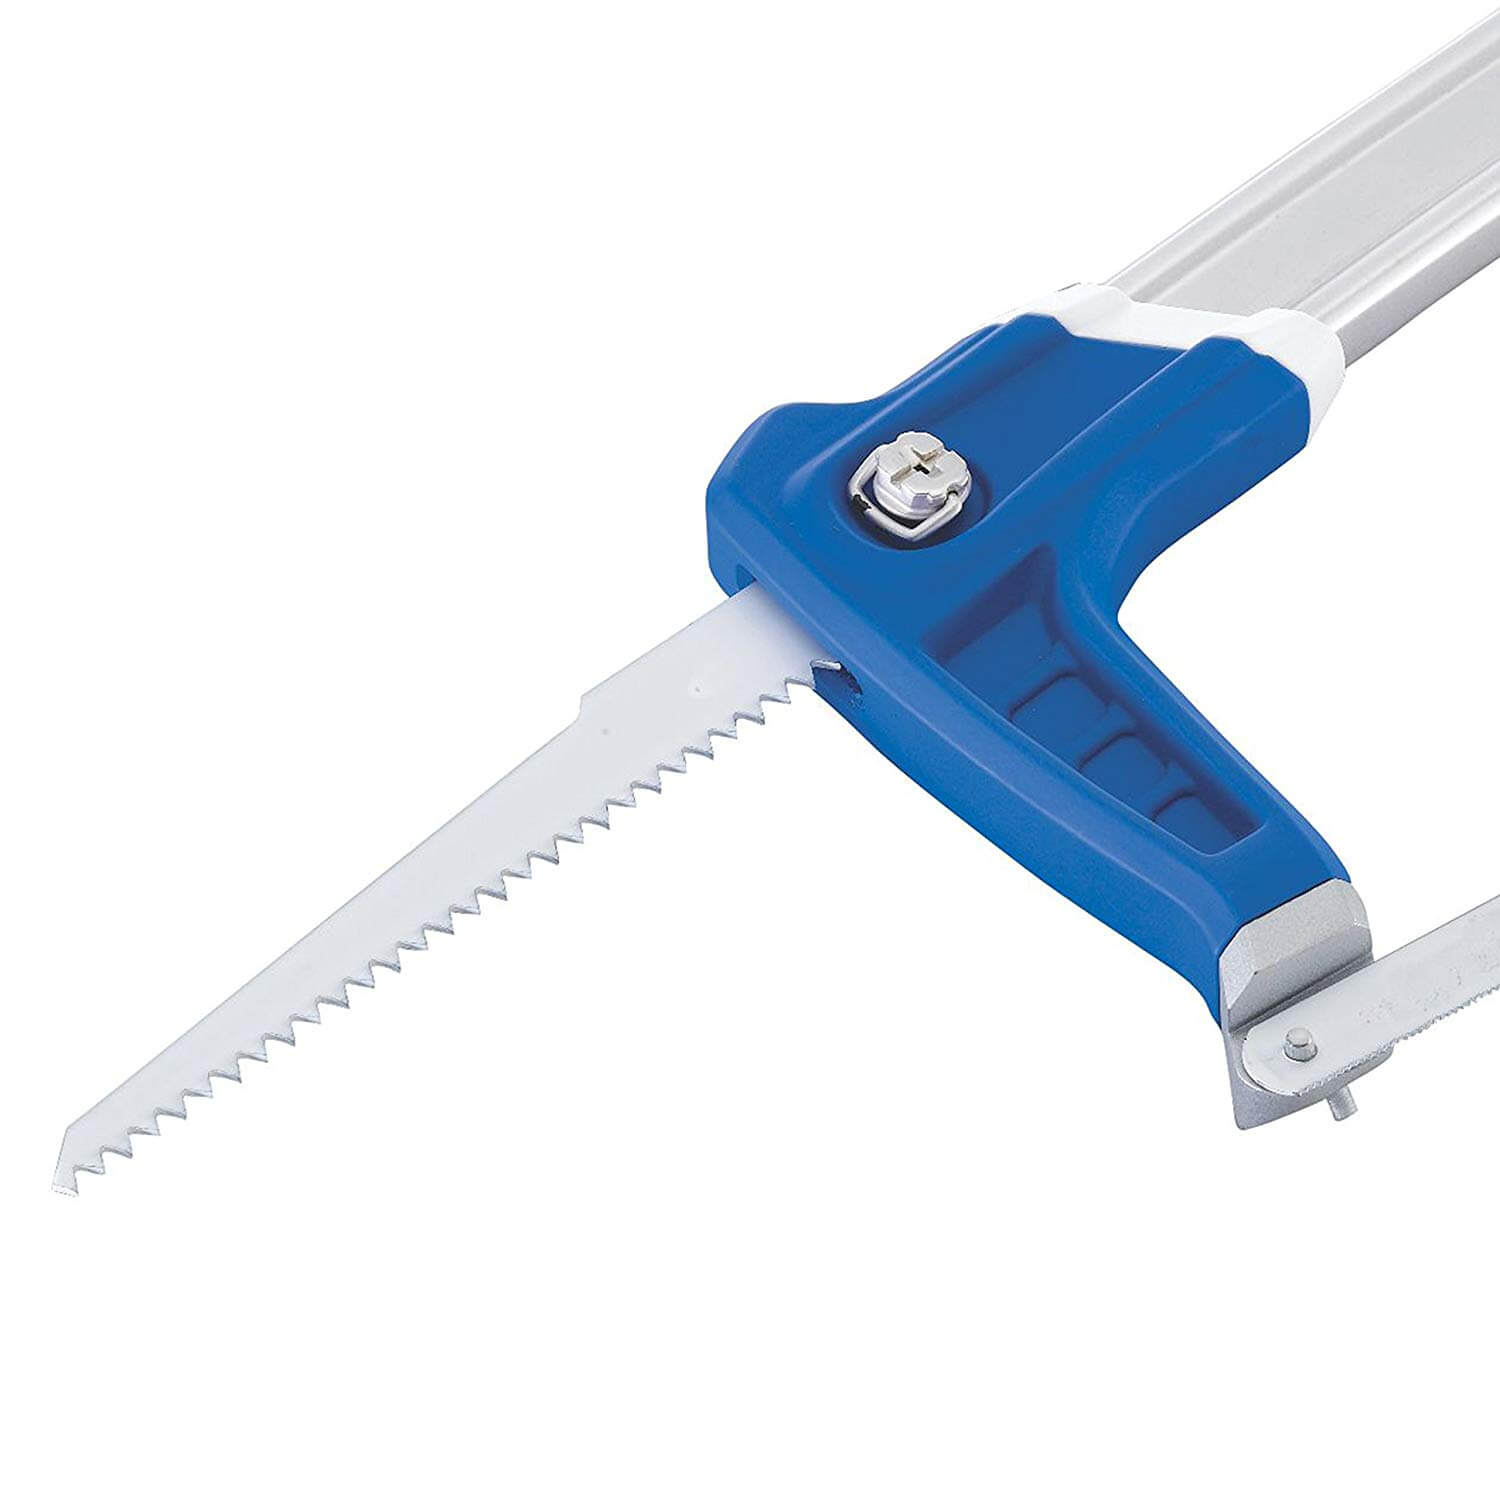 Lenox High Tension Hack Saw - wise-line-tools